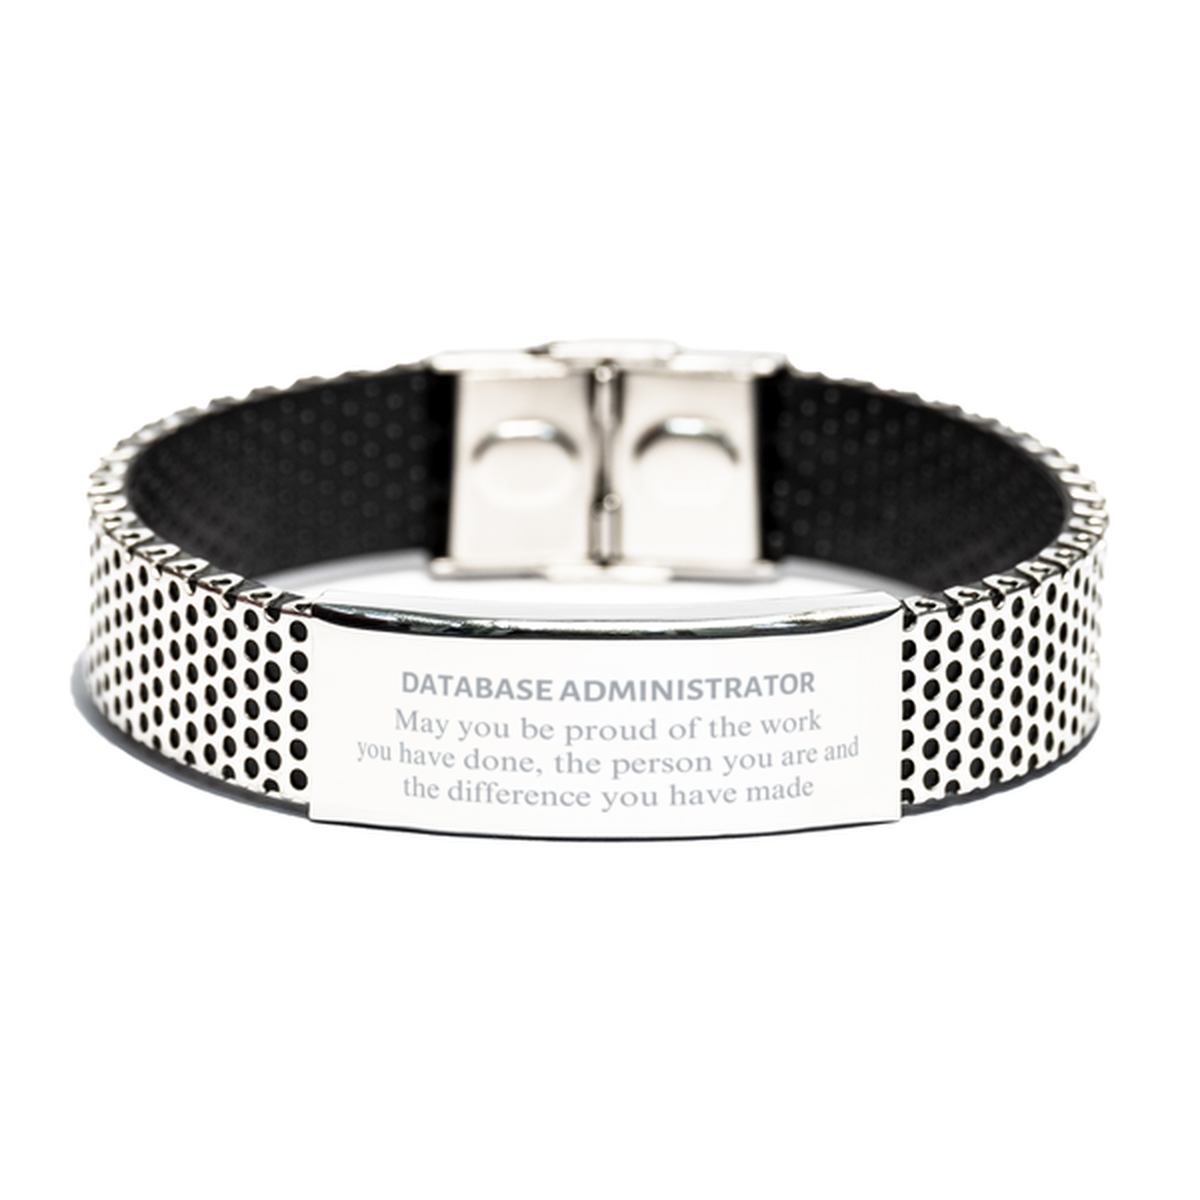 Database Administrator May you be proud of the work you have done, Retirement Database Administrator Stainless Steel Bracelet for Colleague Appreciation Gifts Amazing for Database Administrator